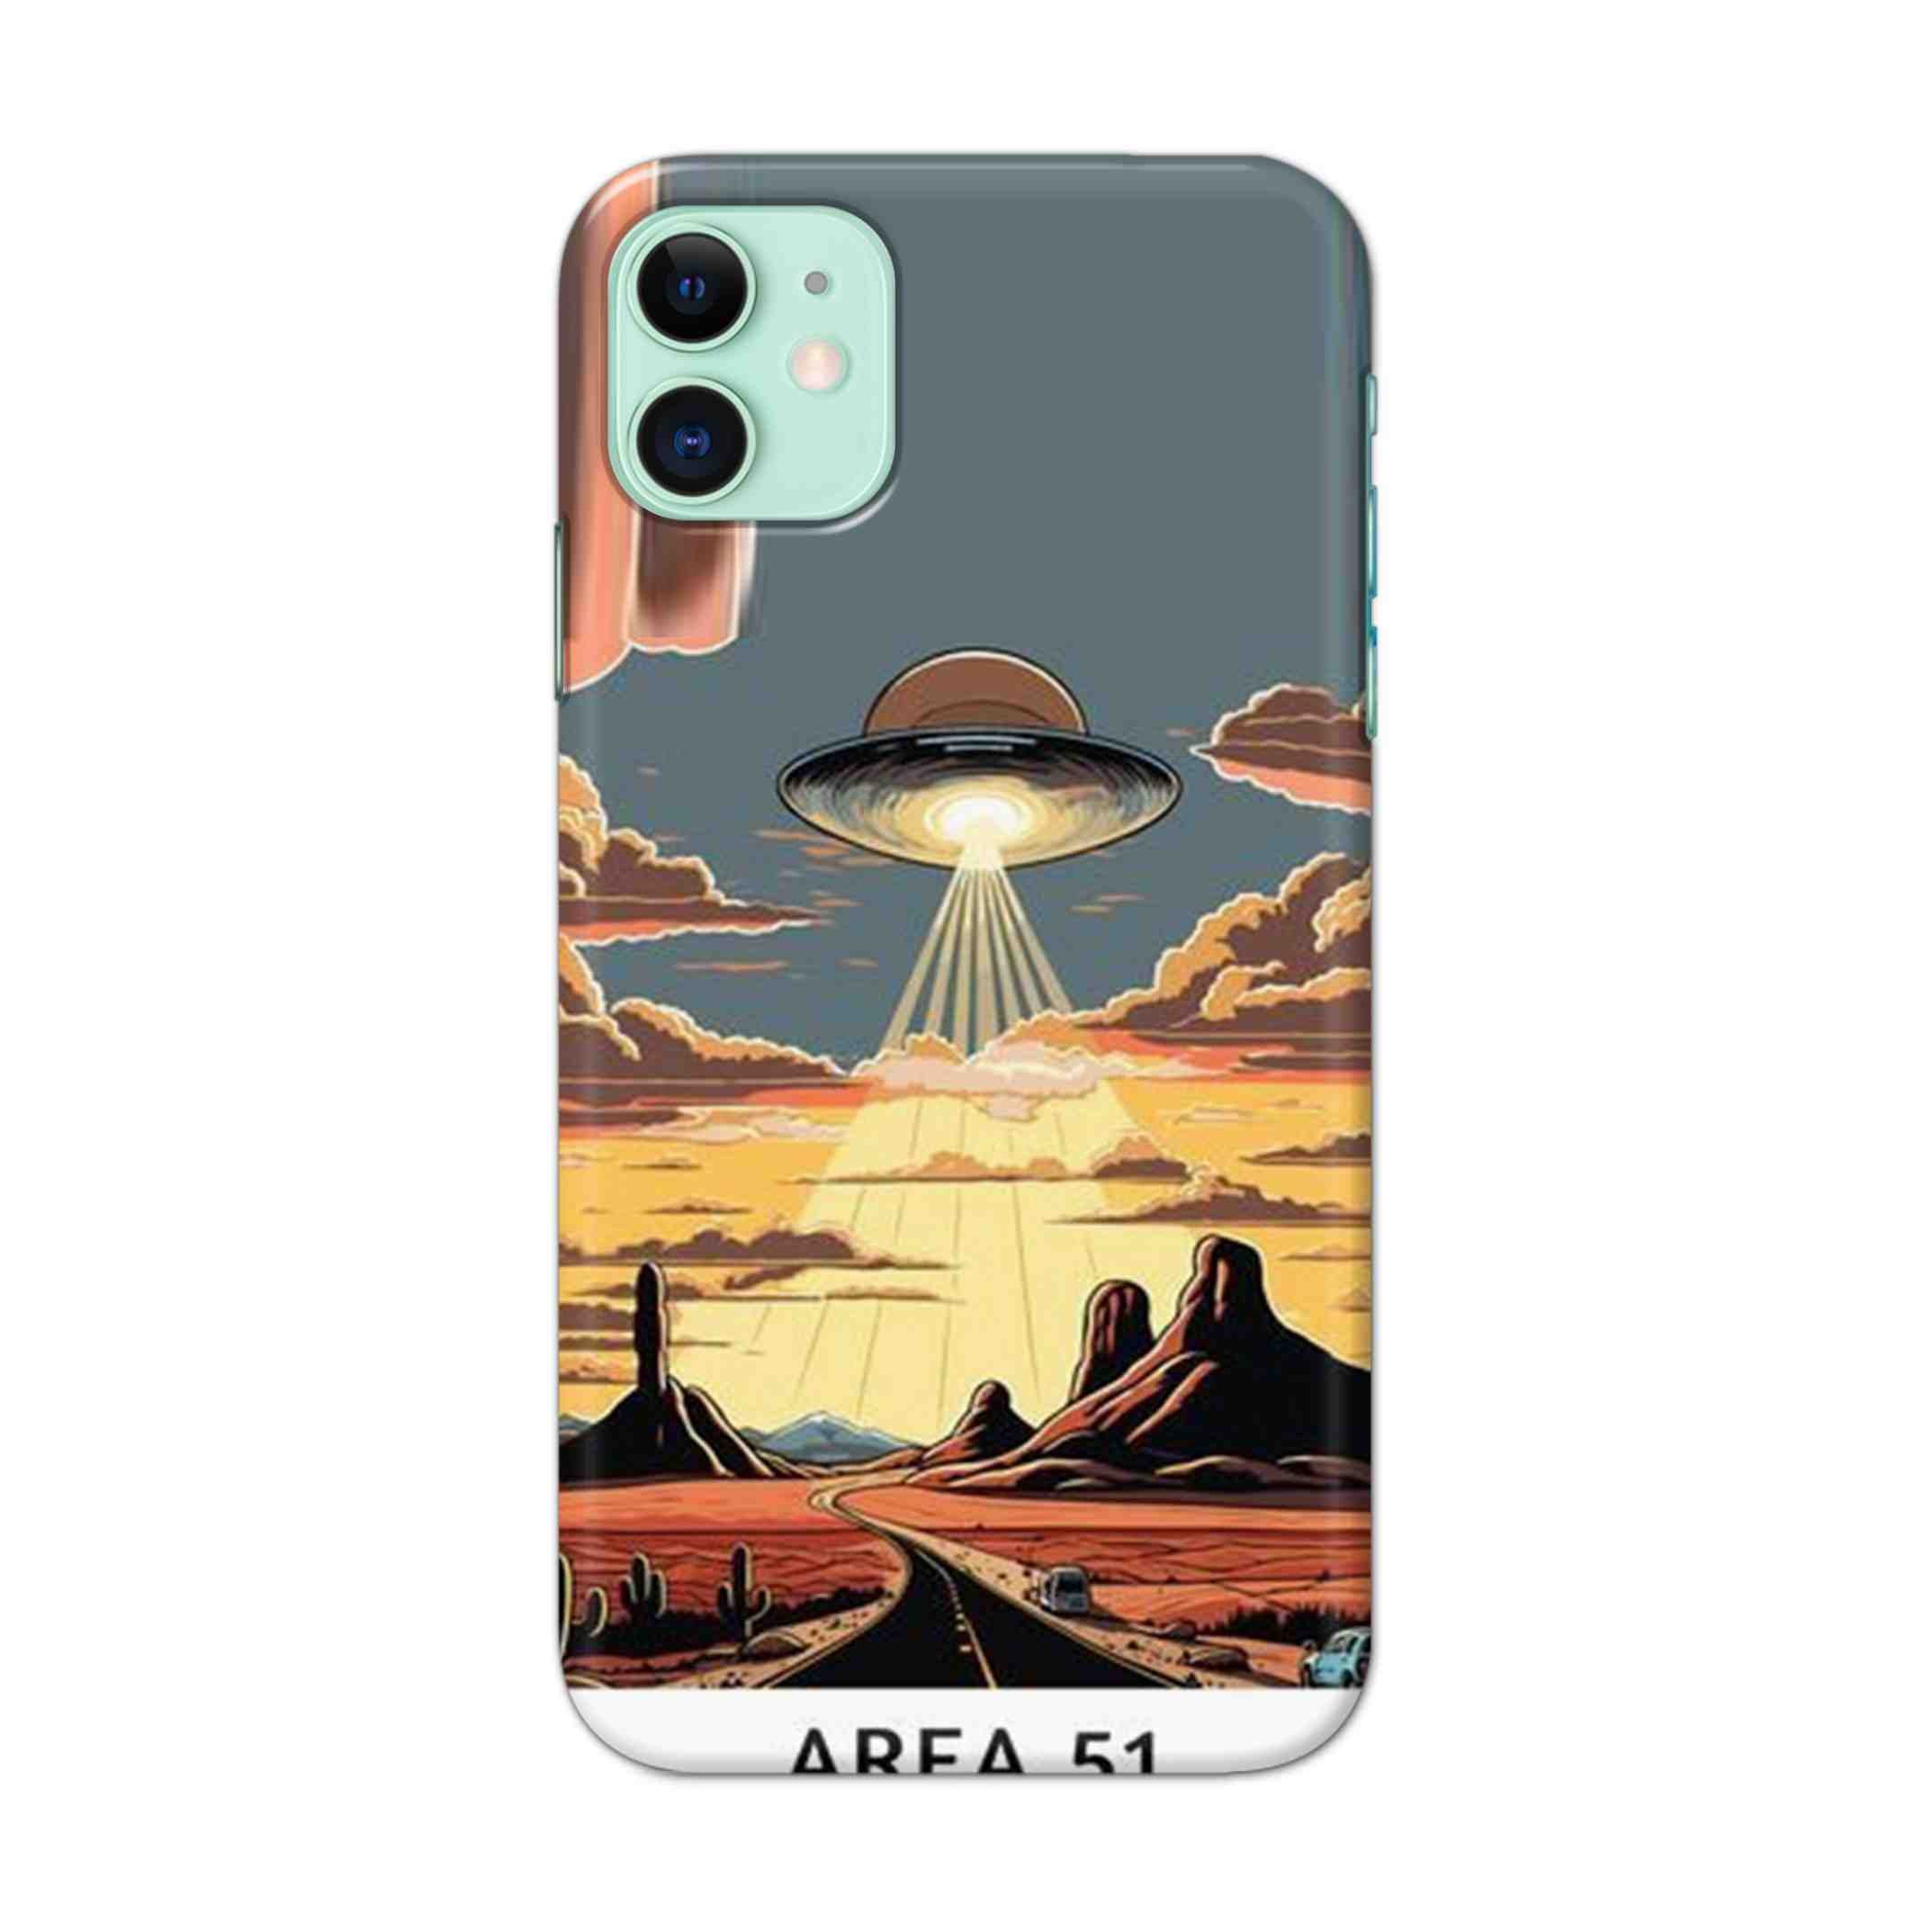 Buy Area 51 Hard Back Mobile Phone Case/Cover For iPhone 11 Online